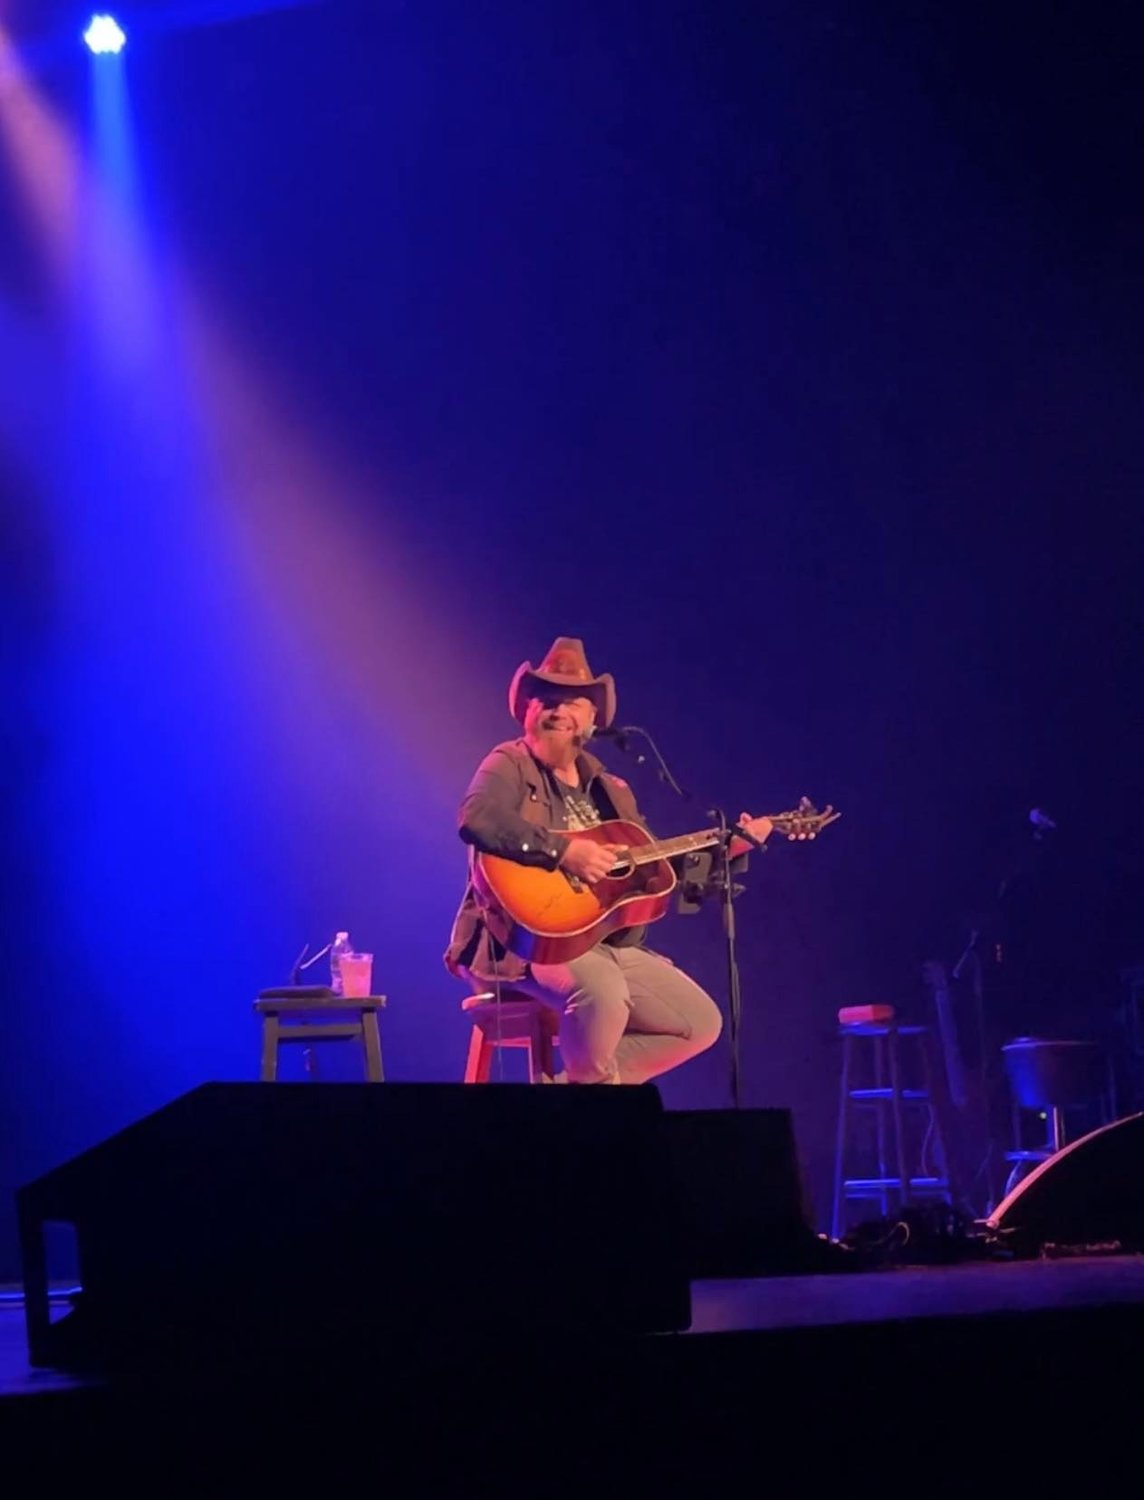 Bobby Pinson takes the stage ahead of Aaron Lewis at Saturday's show at the Gillioz Theatre in Springfield, Mo.